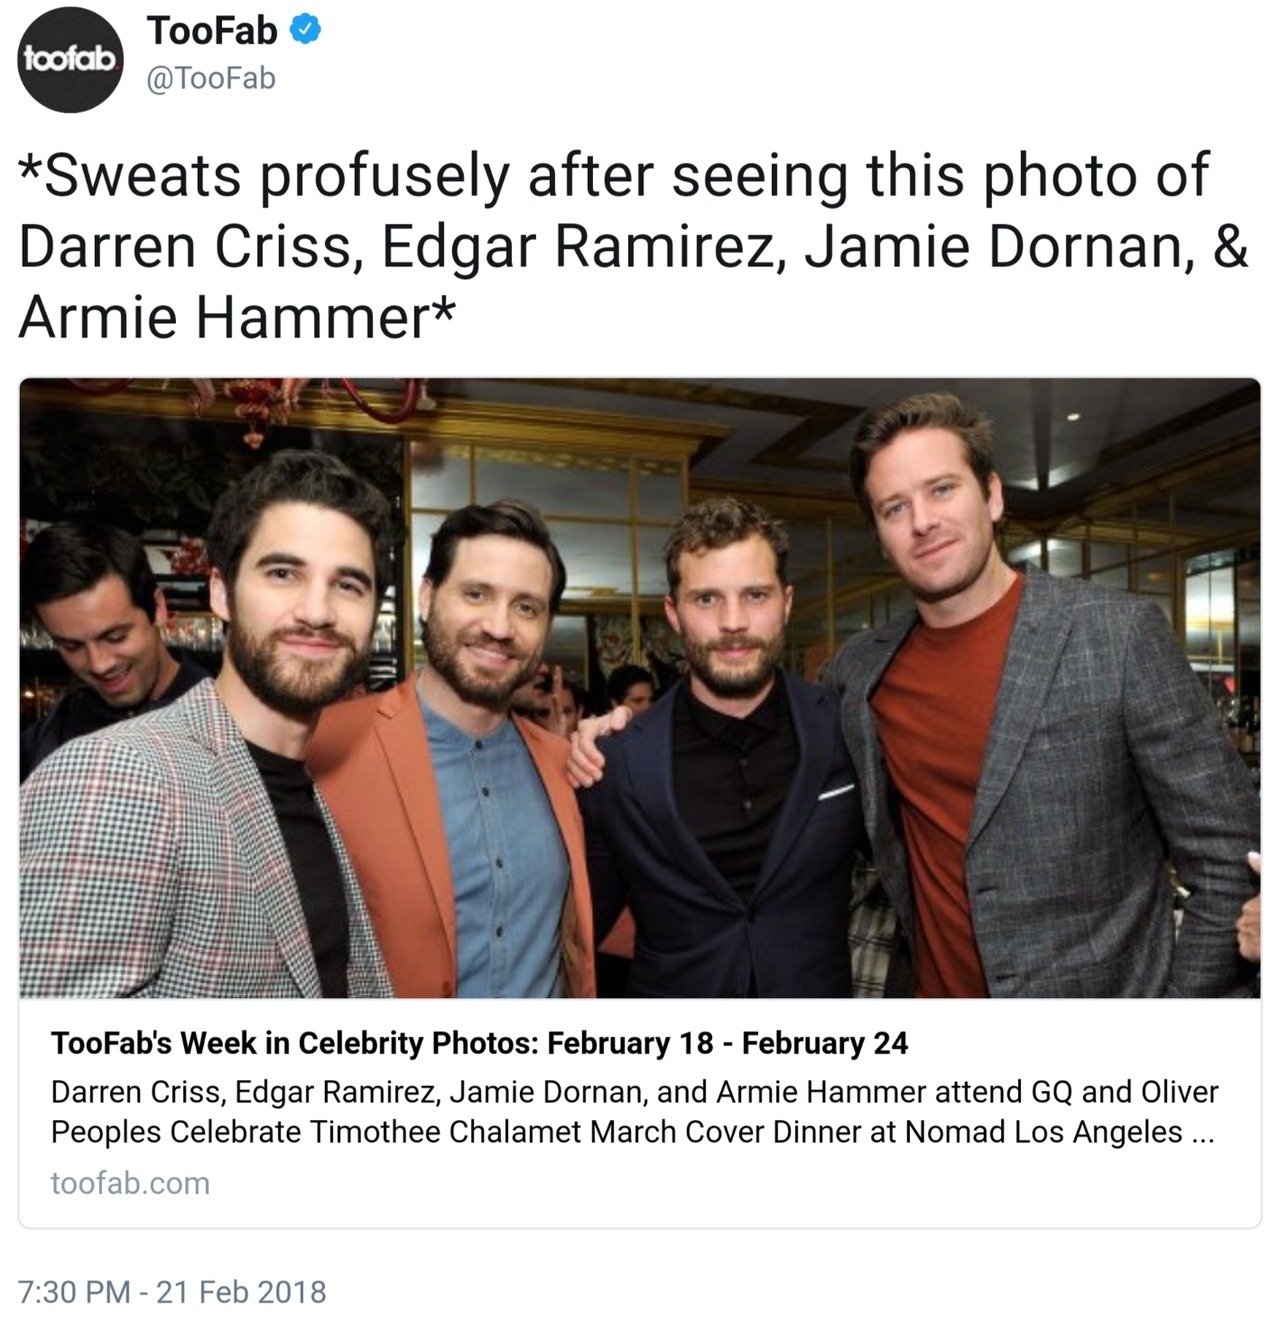 nyfwm - Darren's Miscellaneous Projects and Events for 2018 - Page 2 Tumblr_p4j9dkc5sc1wpi2k2o1_1280